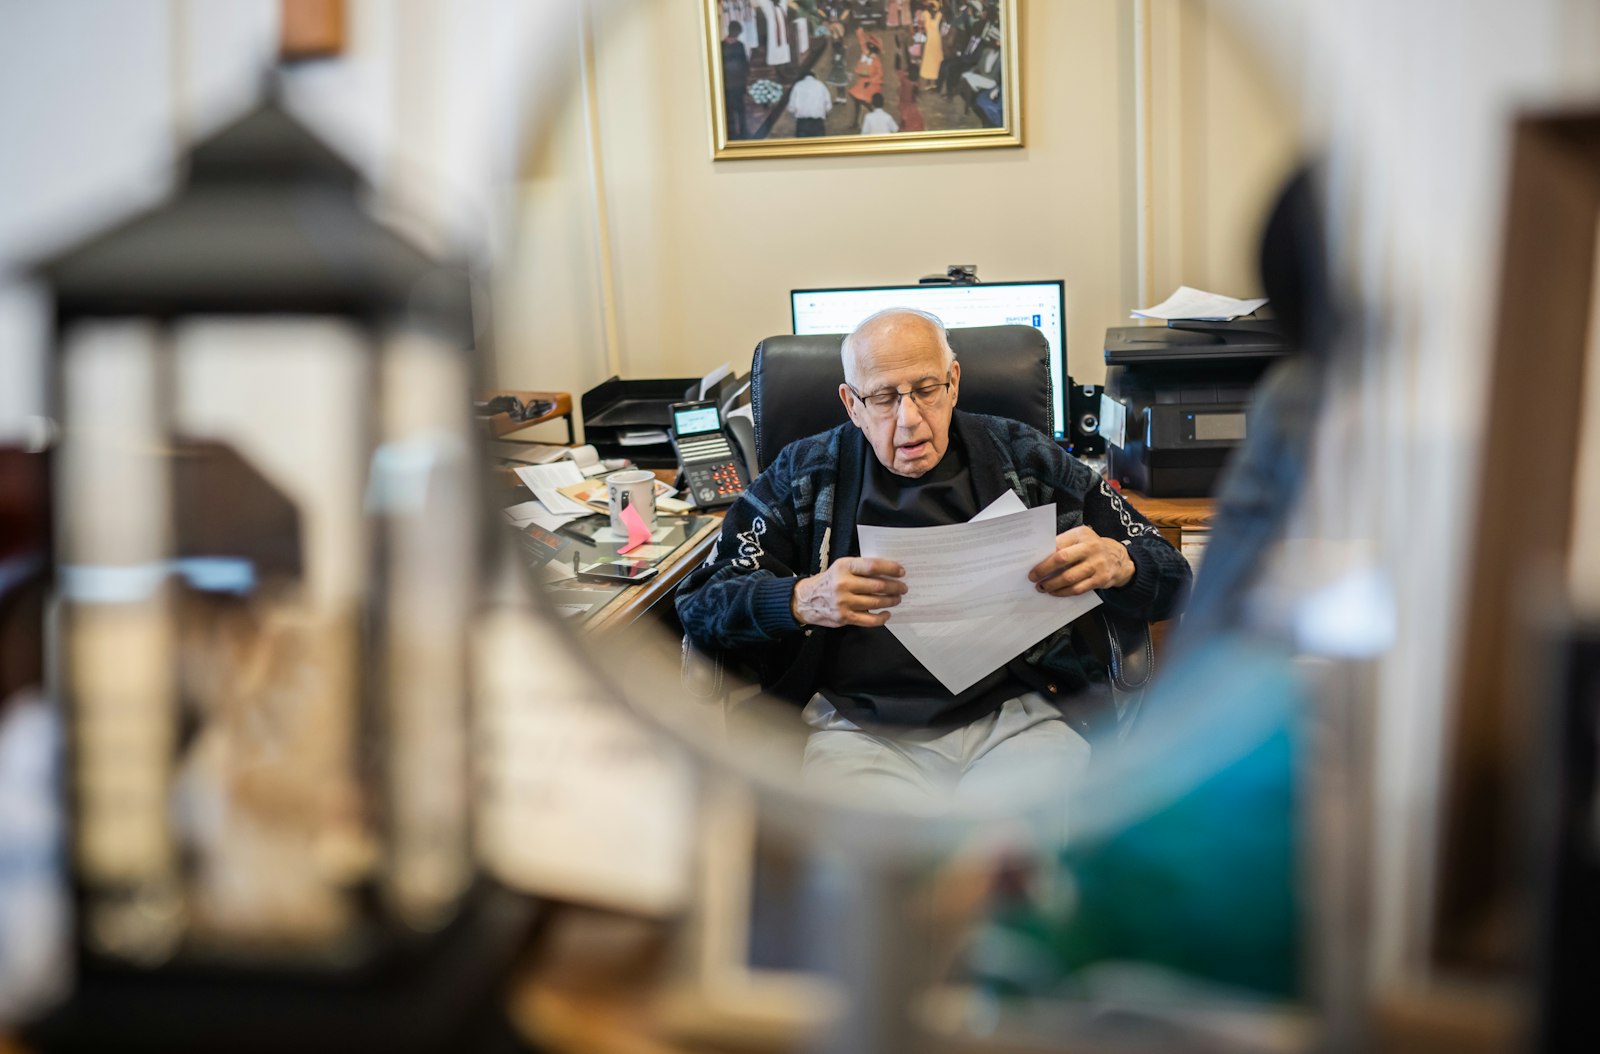 Fr. Thomas goes over paperwork in his office at Sacred Heart Parish in Detroit, where he began serving as pastor in 1968. At 91, he relies more these days on his parish staff, but says he's never considered retiring.